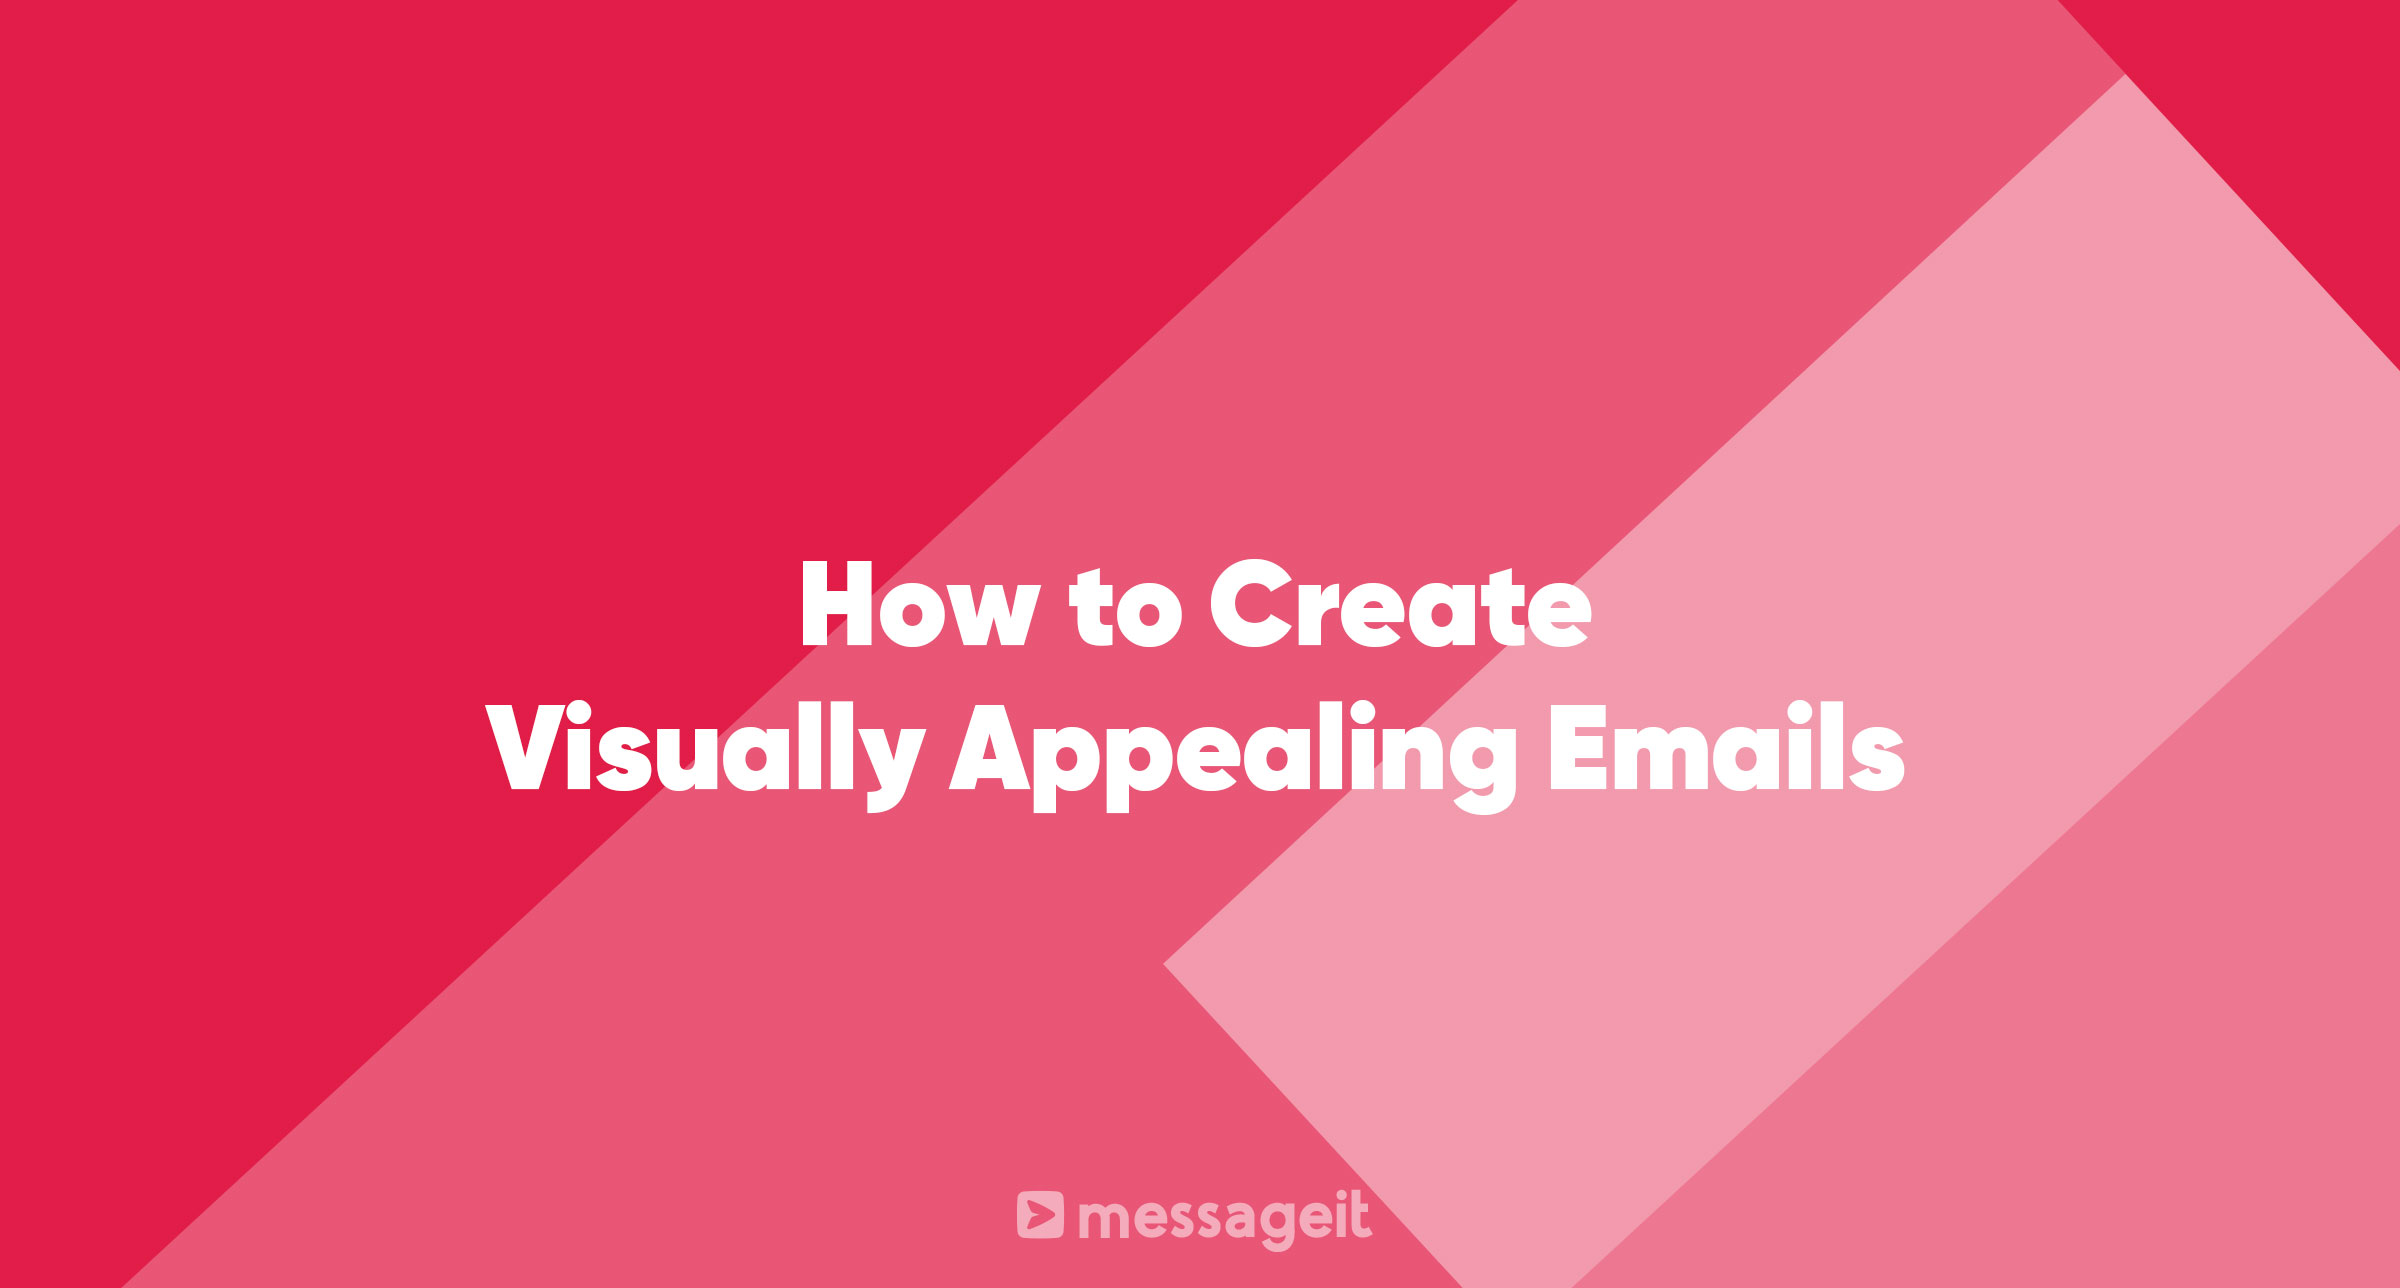 Article | How to Create Visually Appealing Emails